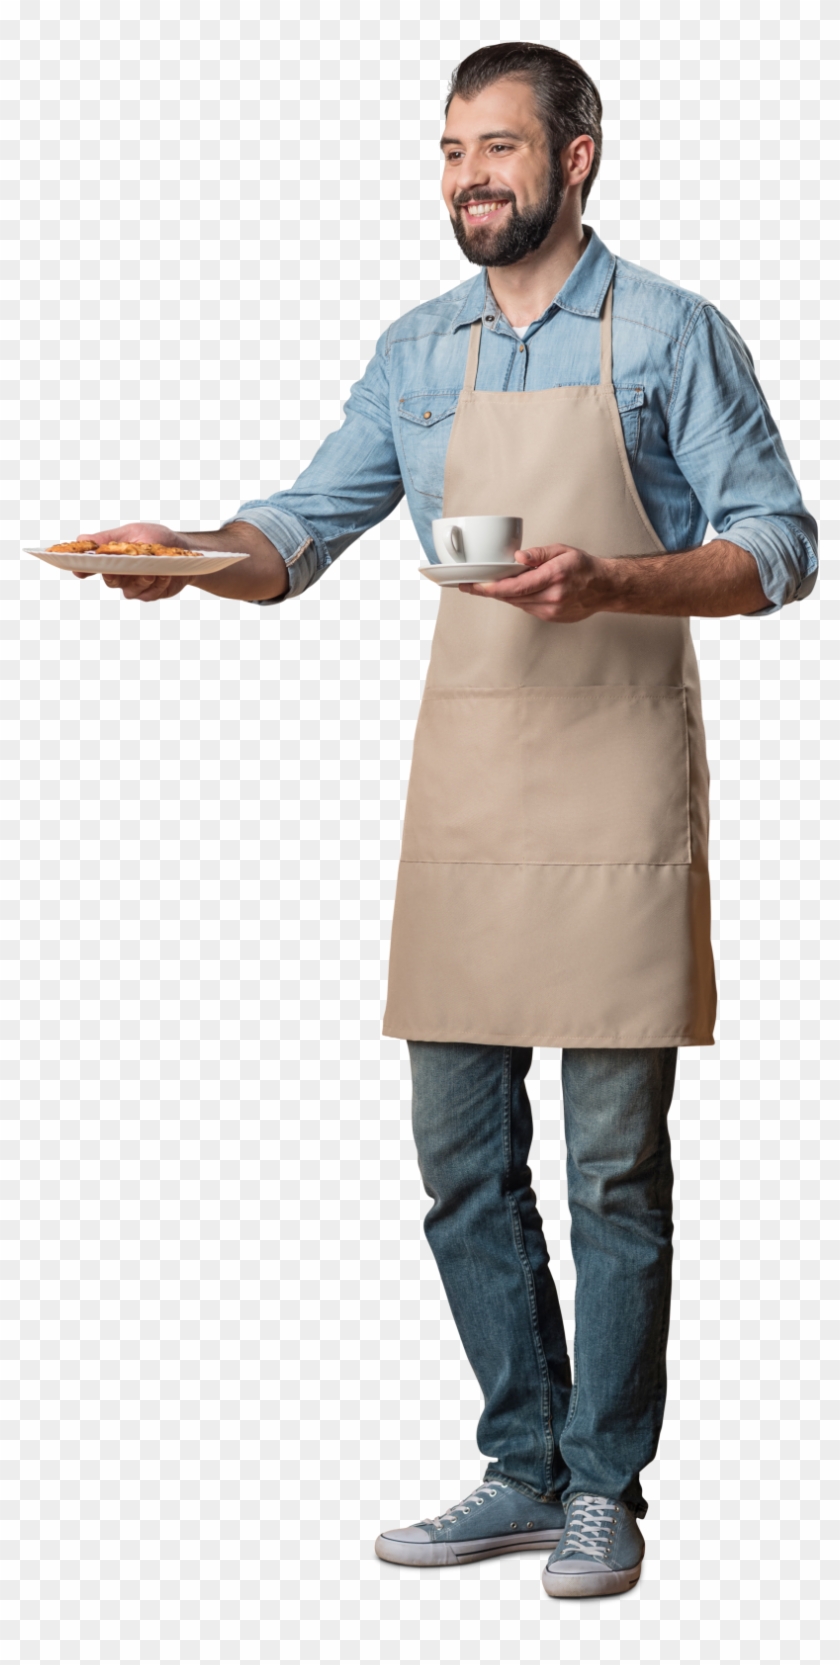 Cut Out Man Waiter With Food And Coffee, Professions - Waiter Png #956732